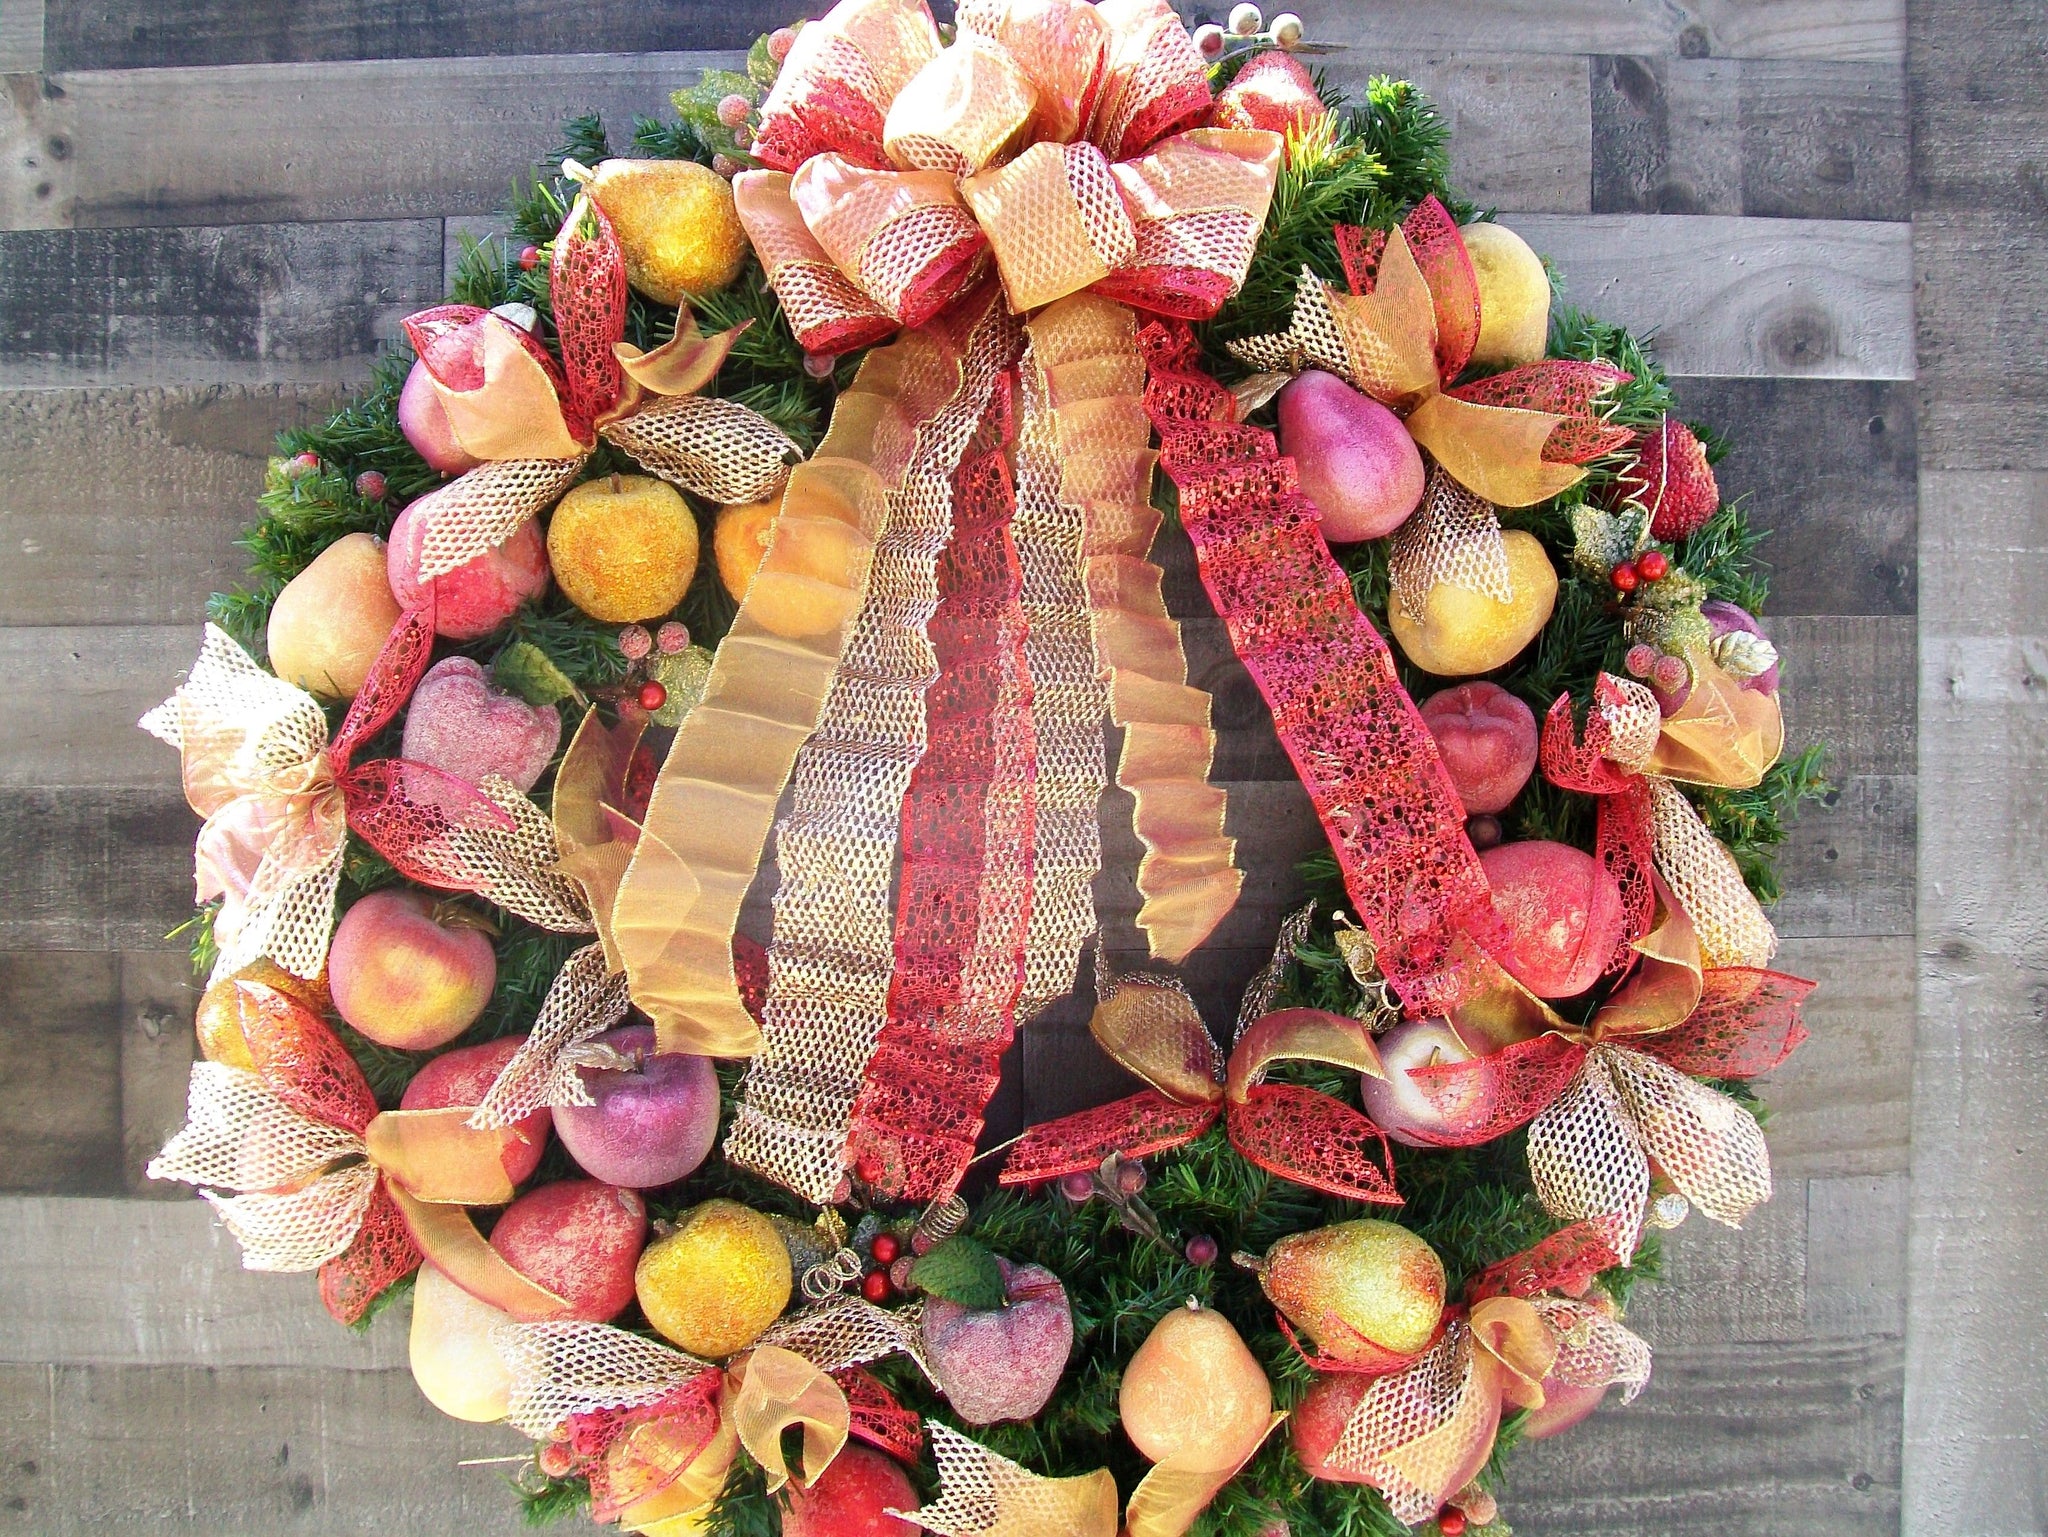 Extra Large 34-Inch Pine Frosted Fruit Decorated Christmas Wreath